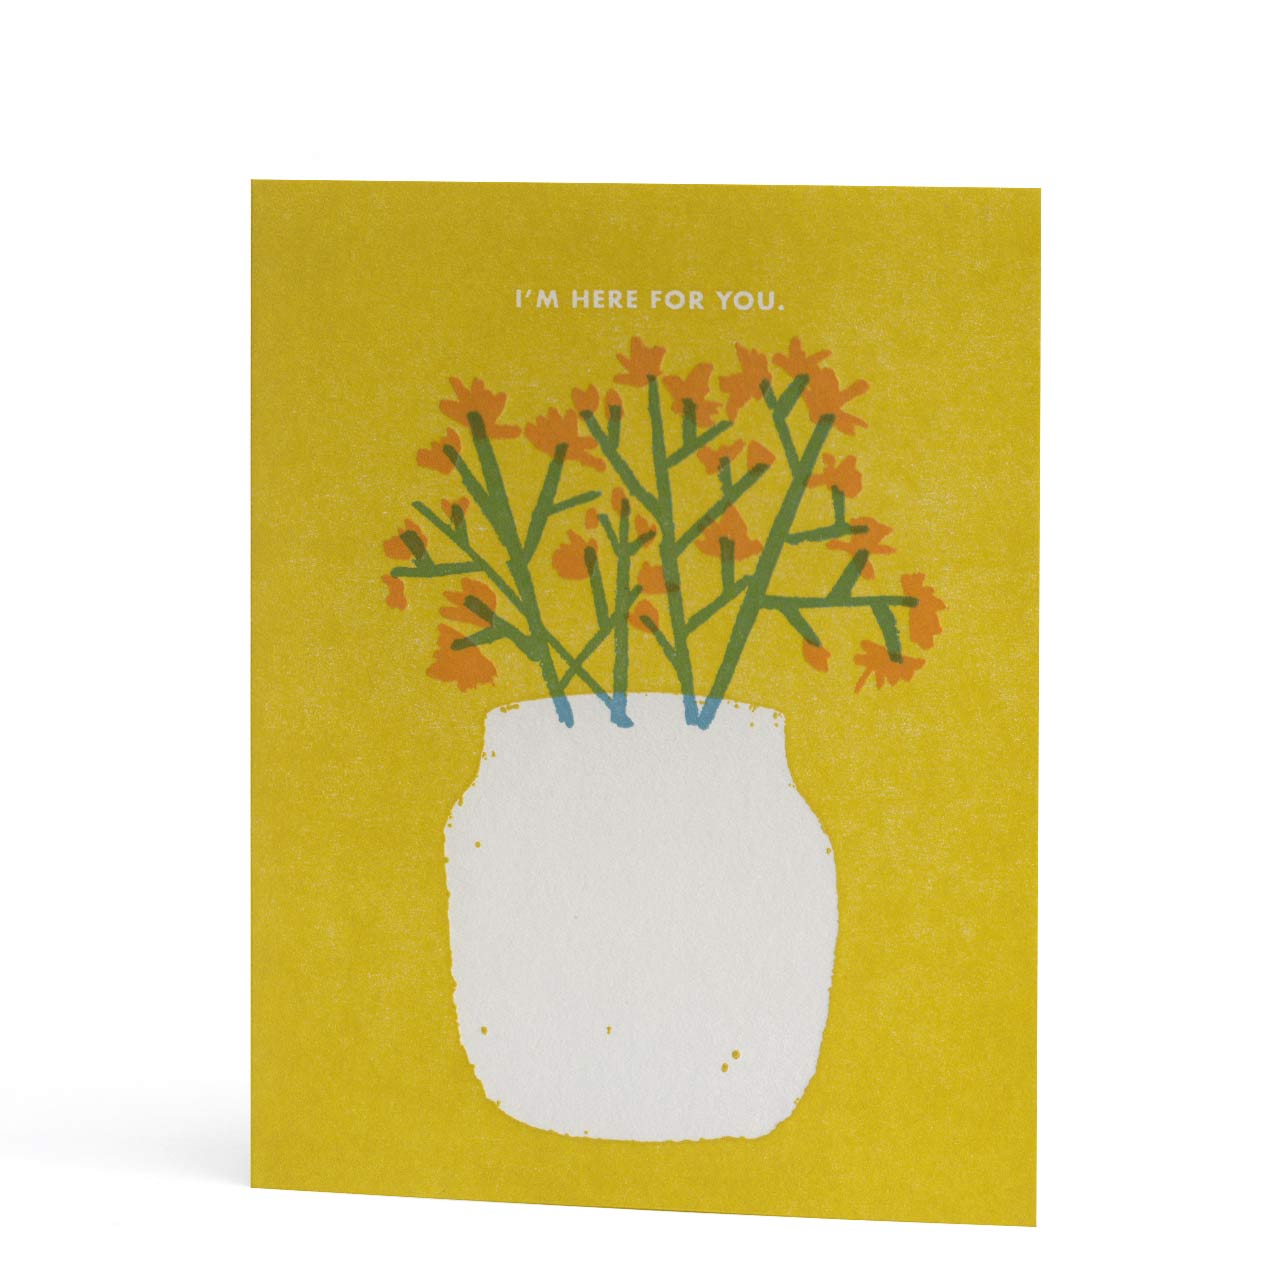 Here For You Letterpress Greeting Card